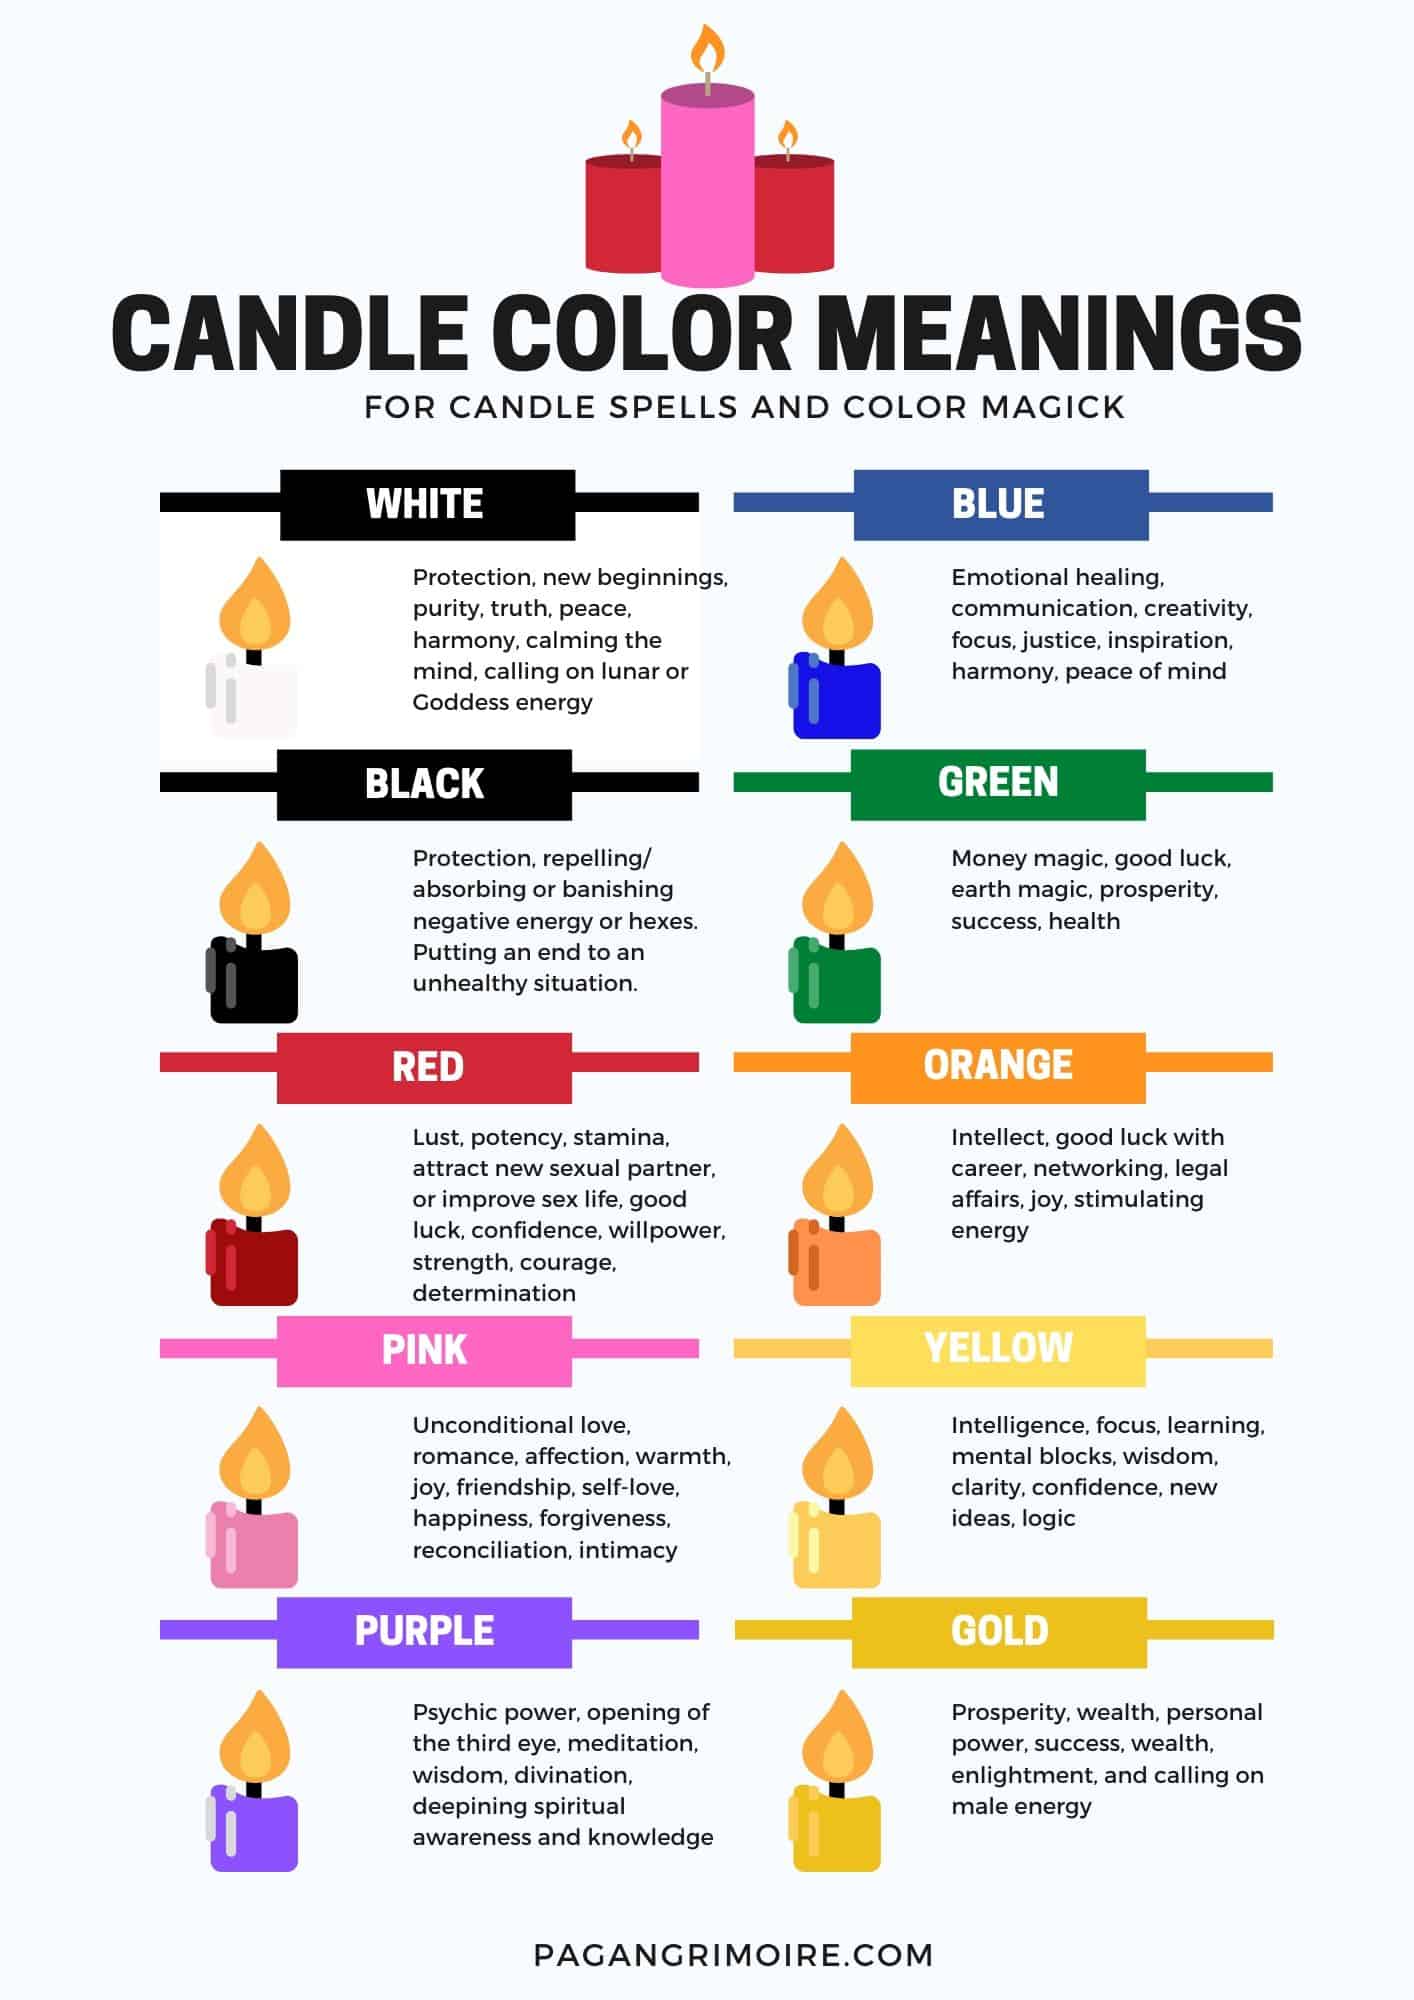 Candle Color Meanings For Spiritual Uses And Magic The Pagan Grimoire